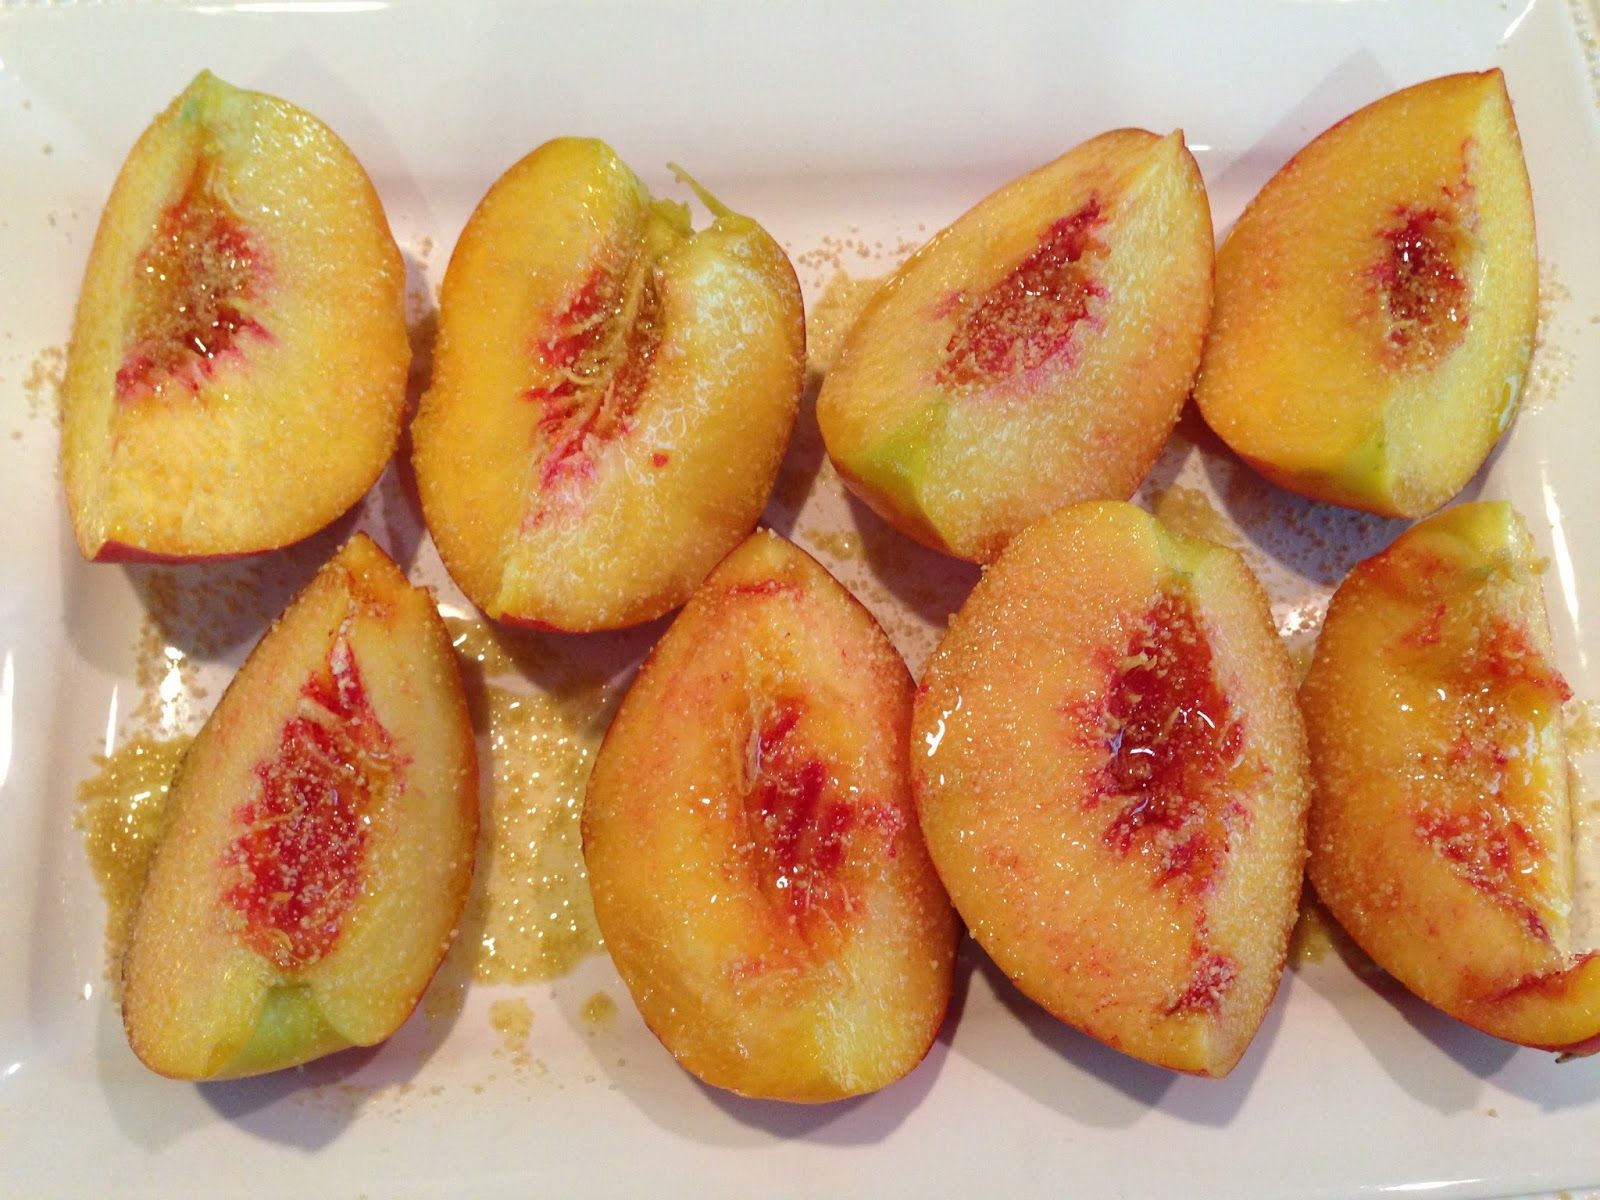 Some Sugar Added: Honey Grilled Peach Salad with Avocados & Macadamias (Product Review)